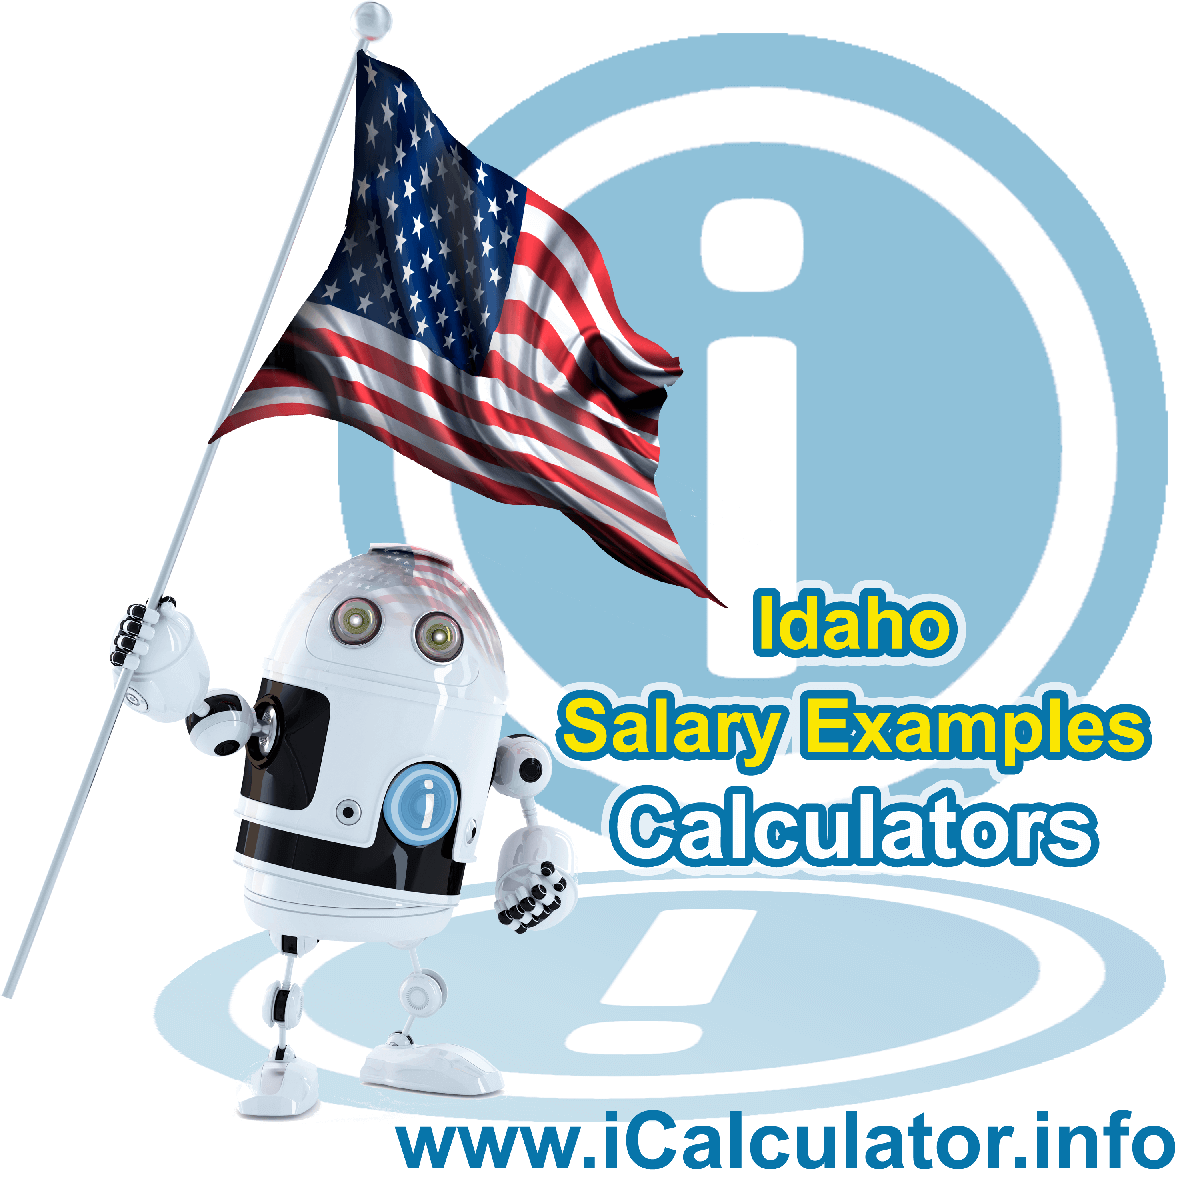 Idaho Salary Example for $70,000.00 in 2022 | iCalculator™ | $70,000.00 salary example for employee and employer paying Idaho State tincome taxes. Detailed salary after tax calculation including Idaho State Tax, Federal State Tax, Medicare Deductions, Social Security, Capital Gains and other income tax and salary deductions complete with supporting Idaho state tax tables 